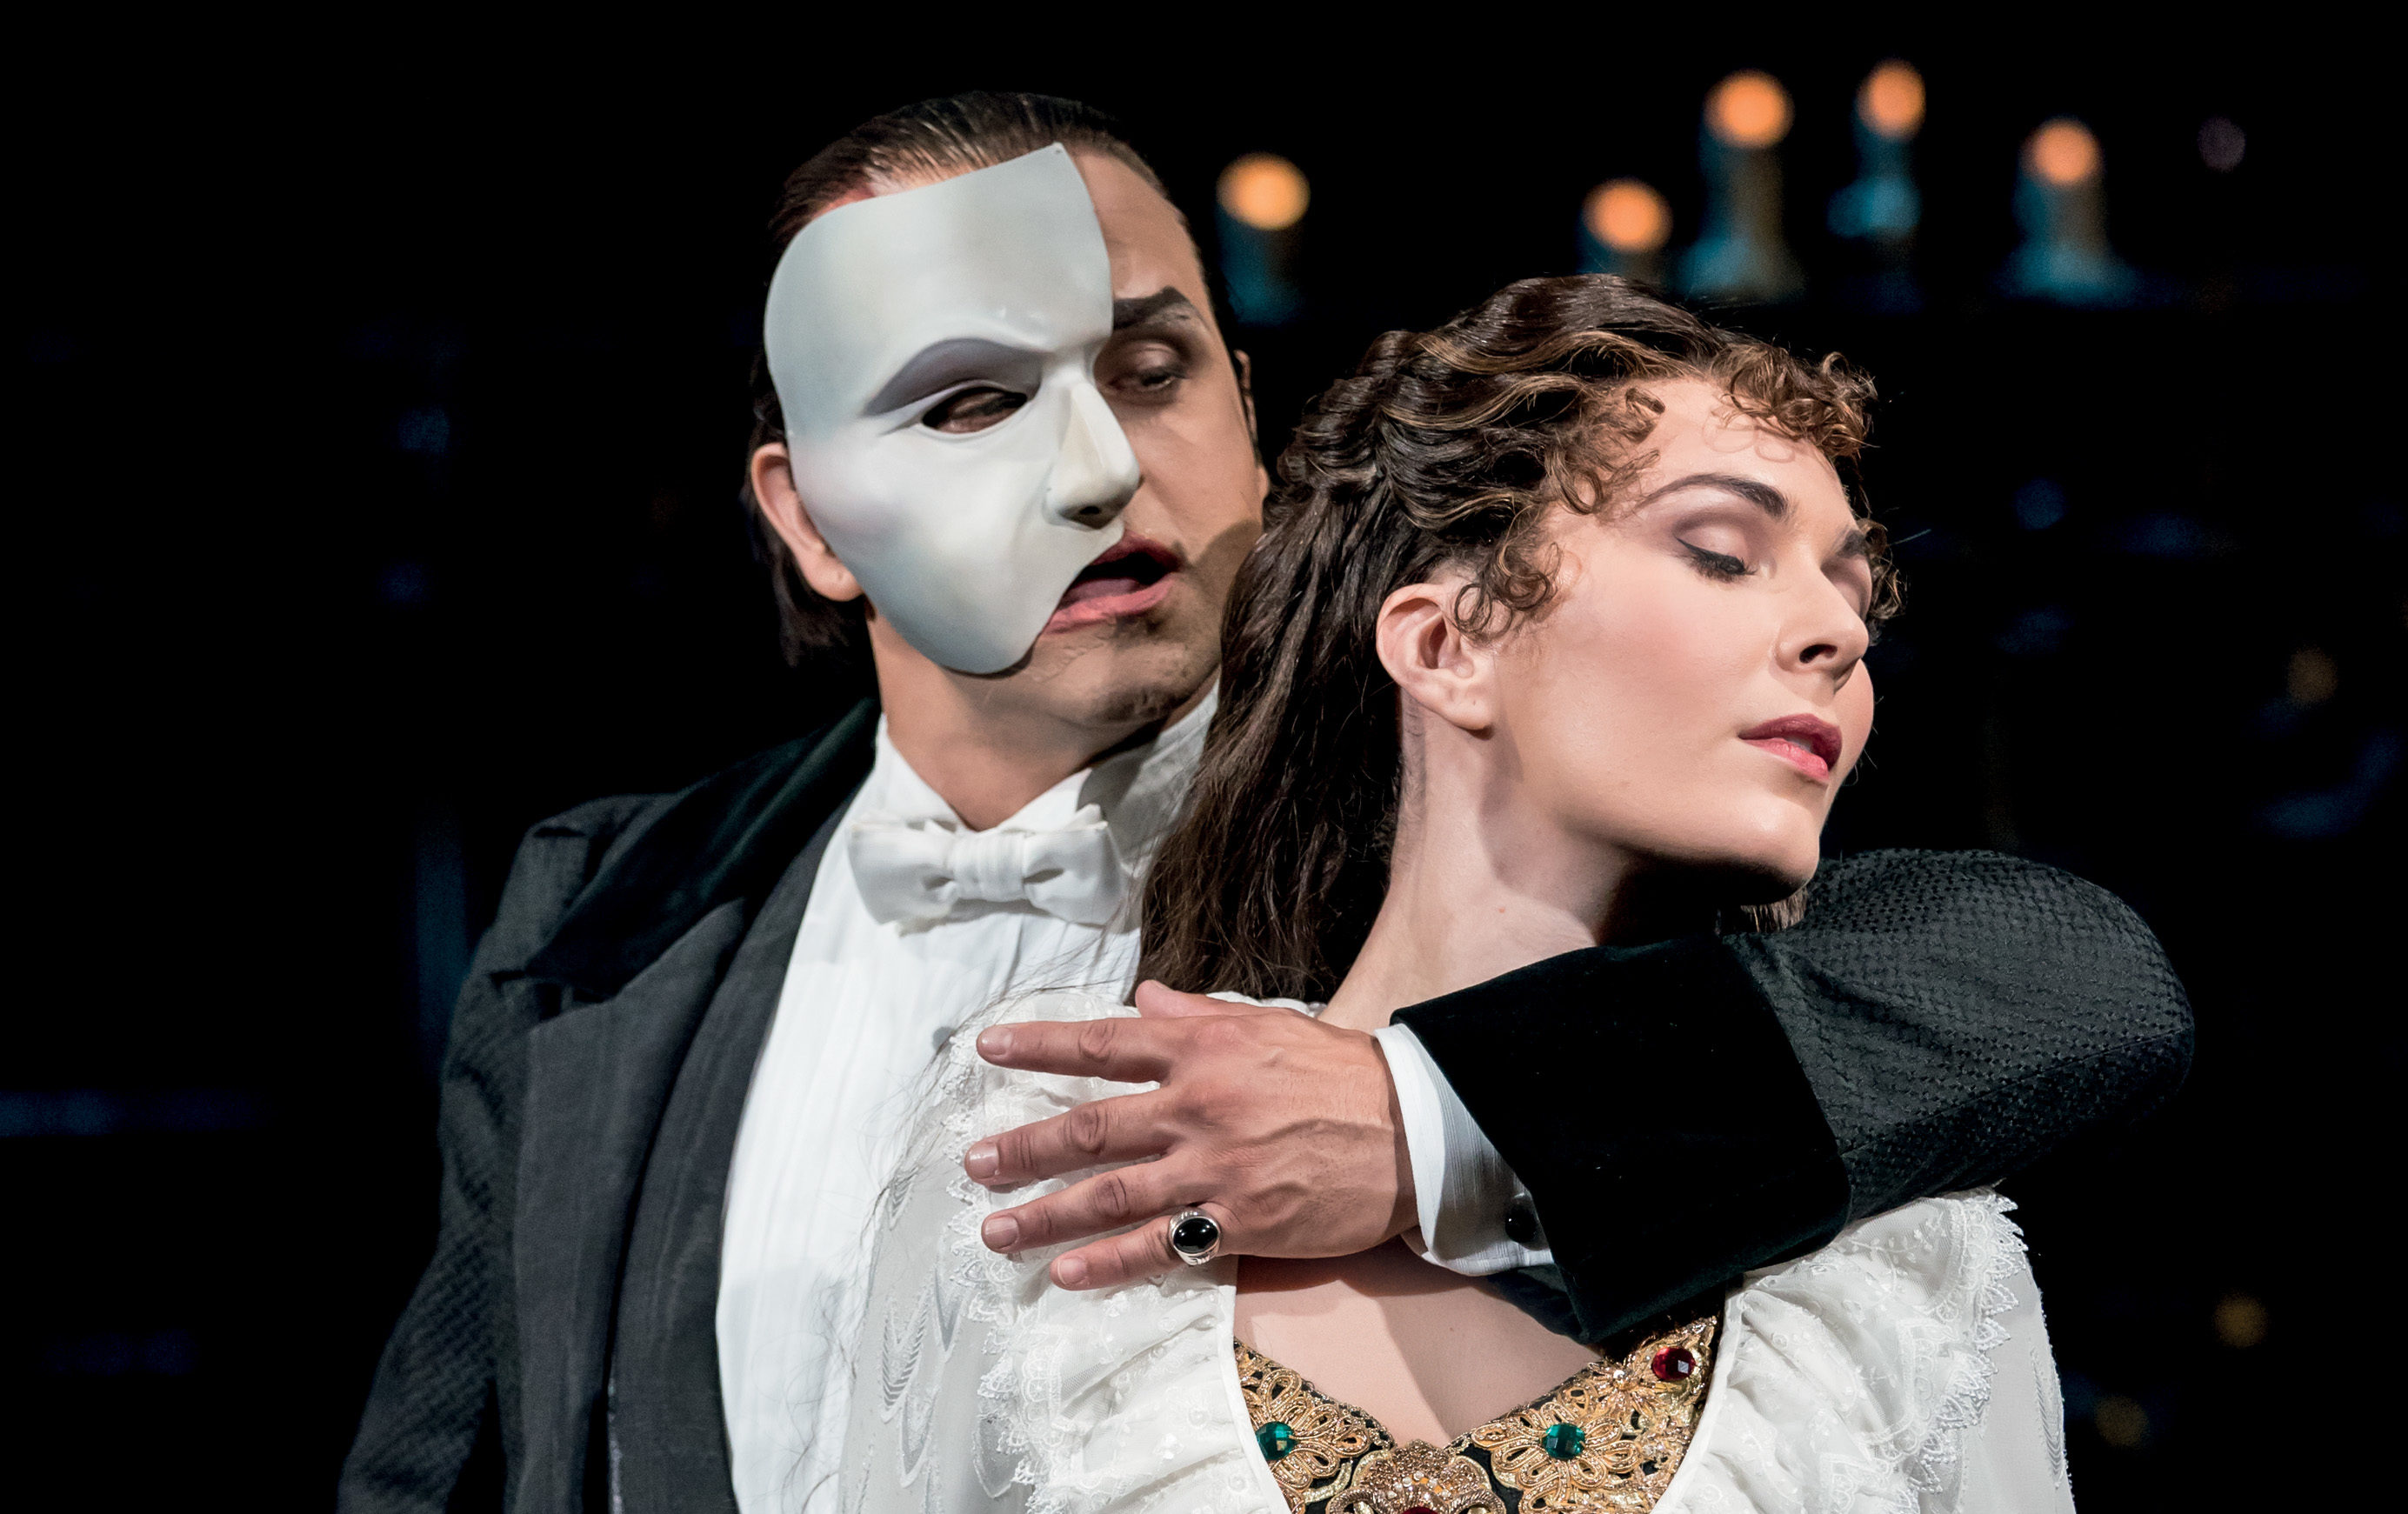 Kelly Mathieson on stage with Tim Howar in The Phantom of the Opera (Johan Persson)